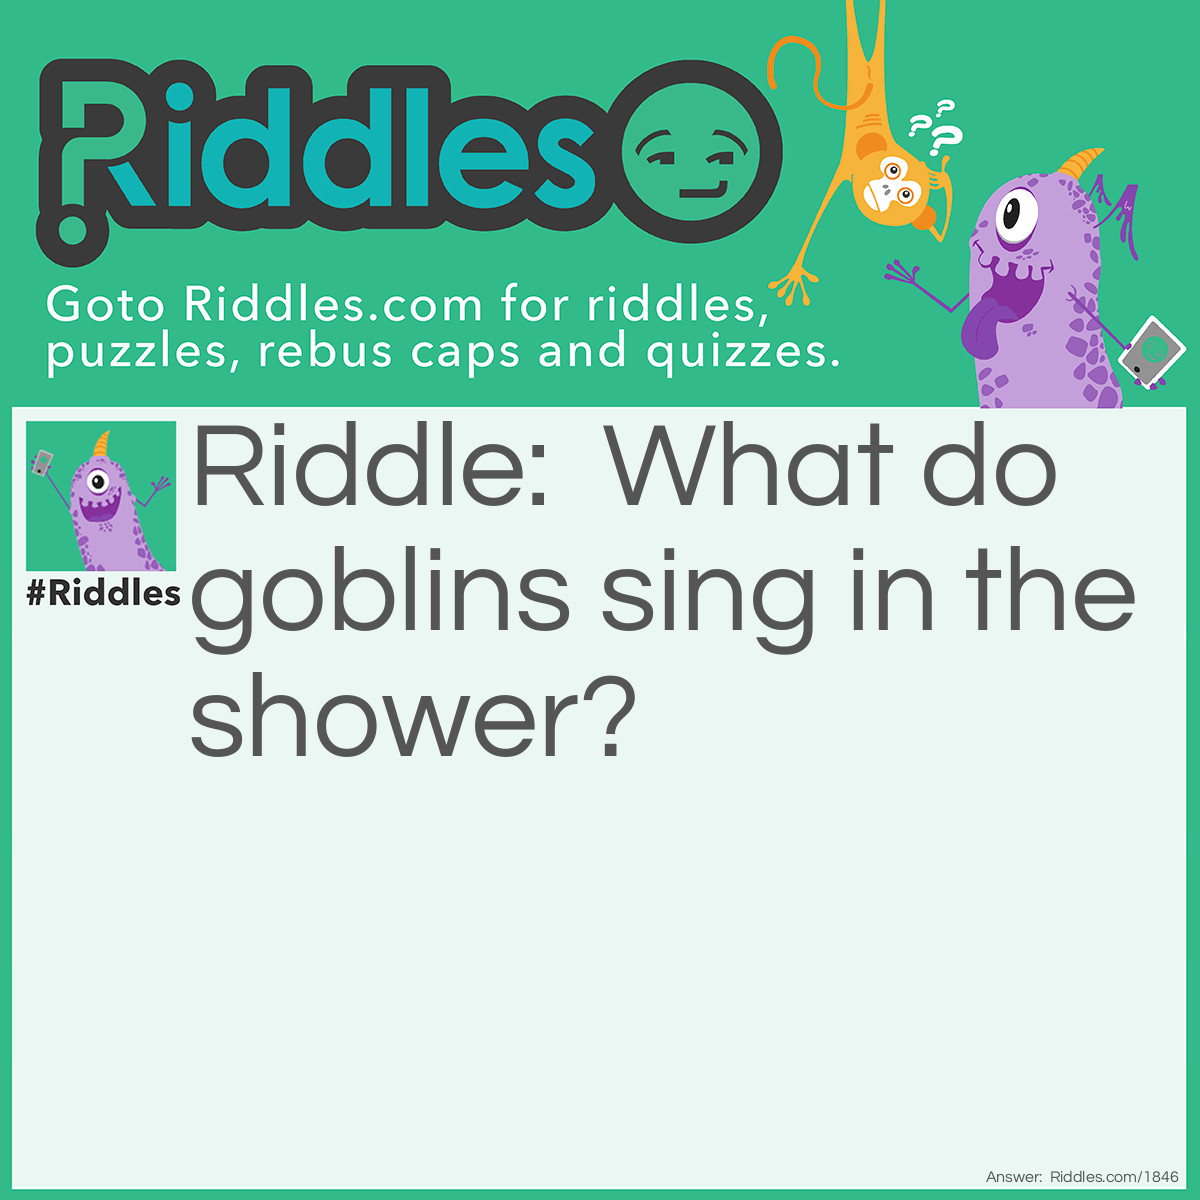 Riddle: What do goblins sing in the shower? Answer: Rhythm and boos.